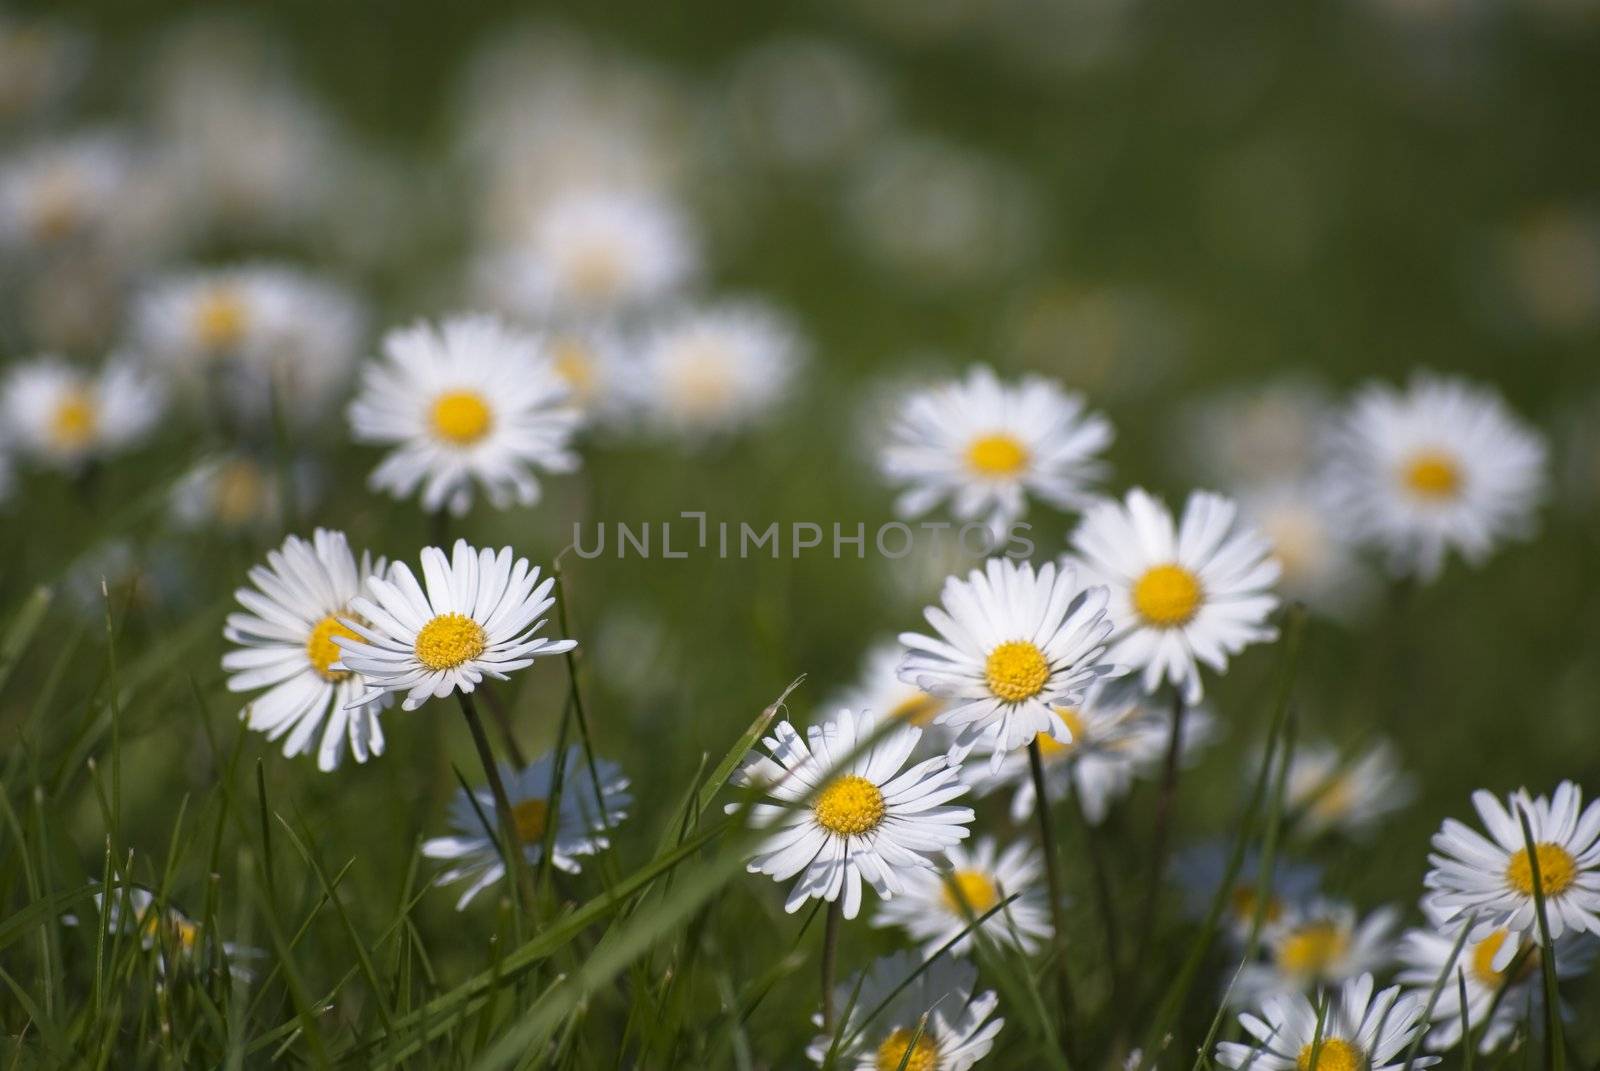 A close-up, shallow depth of field shot of daisies in a grassy meadow in bright sunlight.  